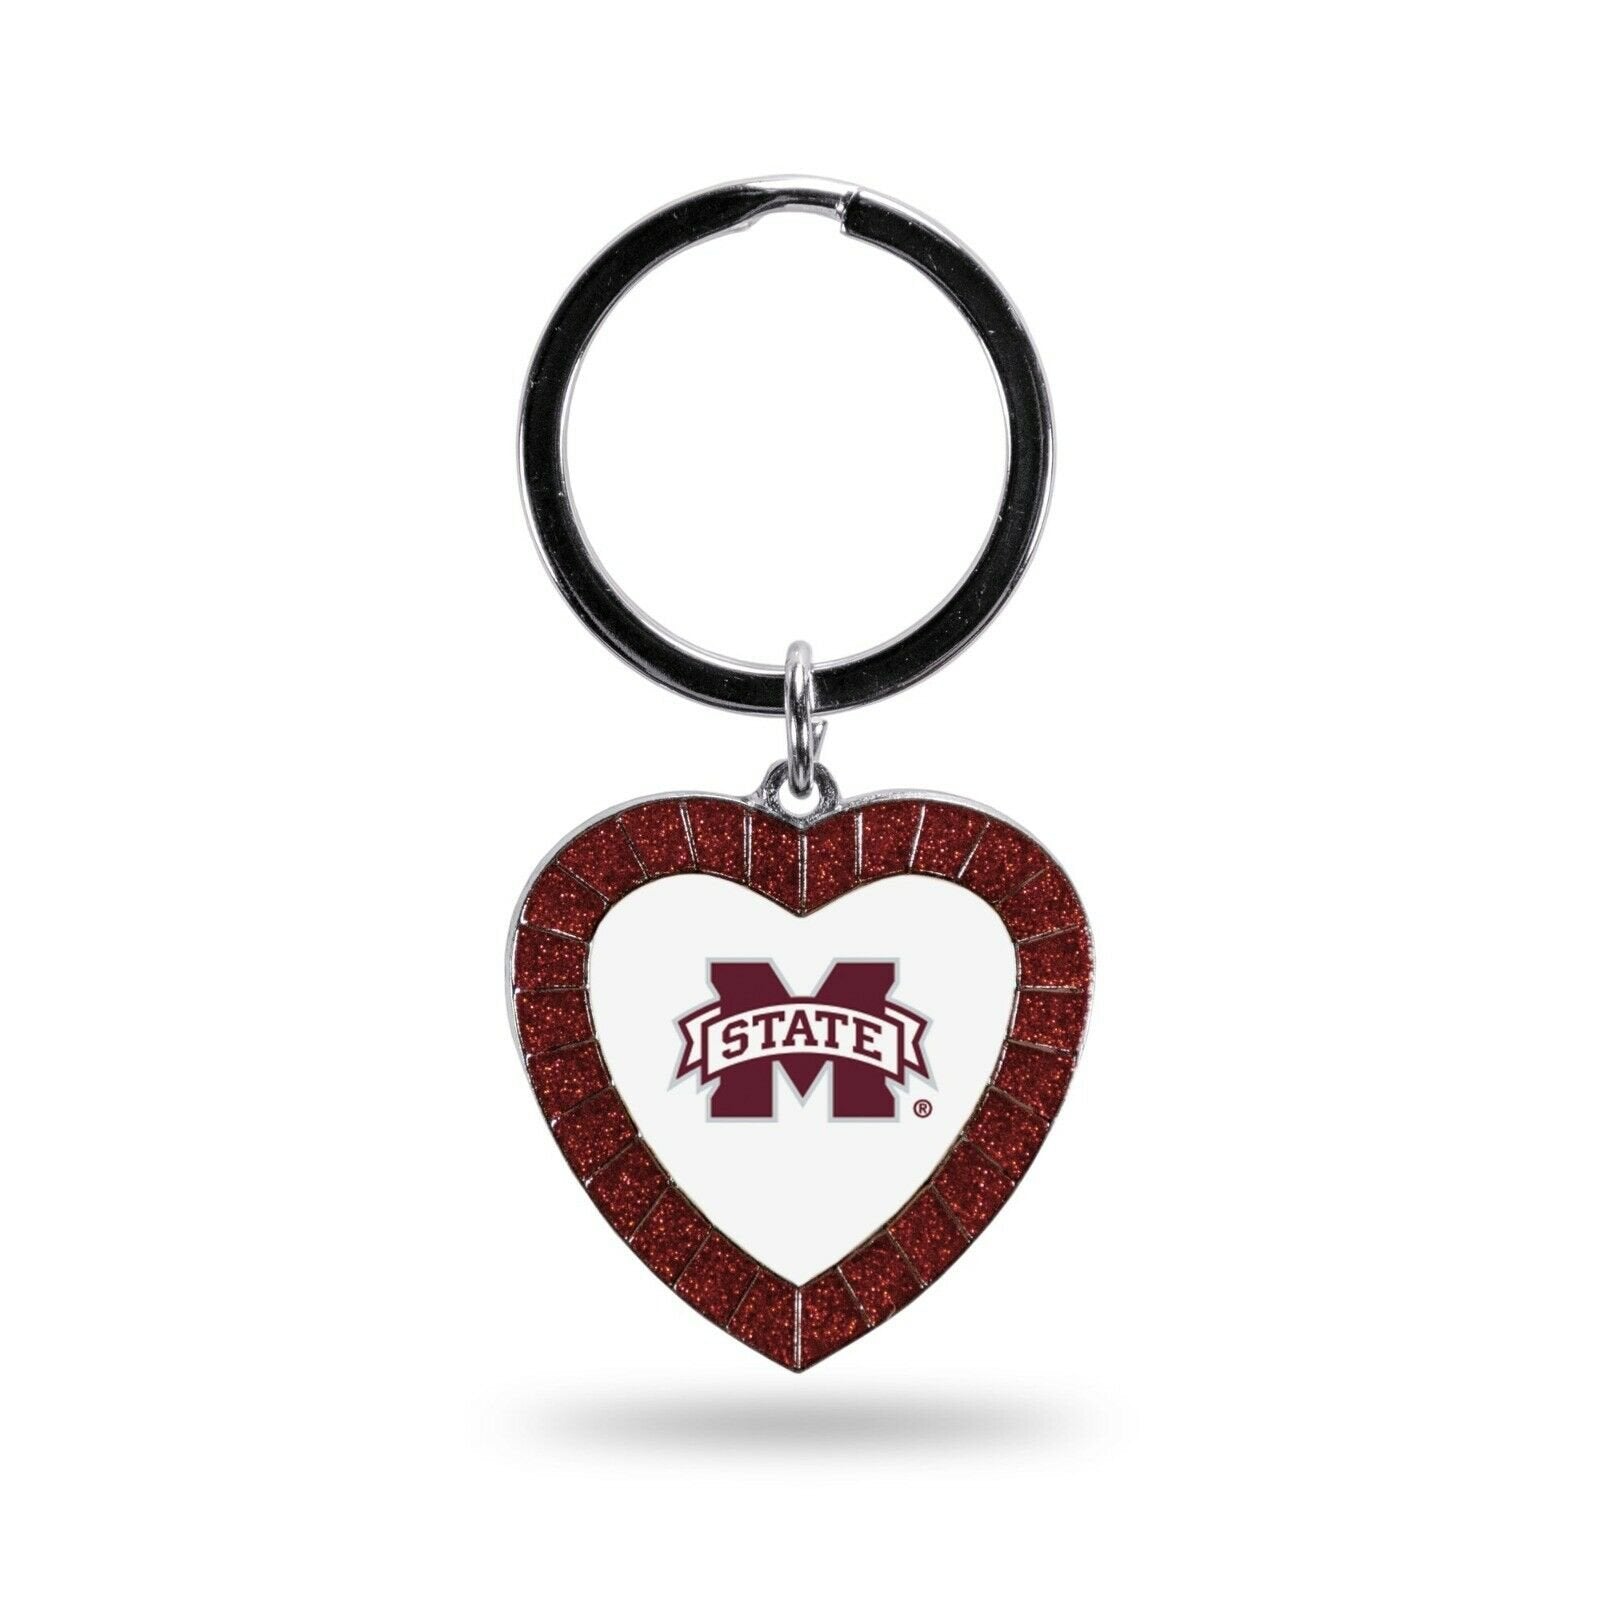 Mississippi State Bulldogs Keychain Rhinestone Heart Decal Team Color University